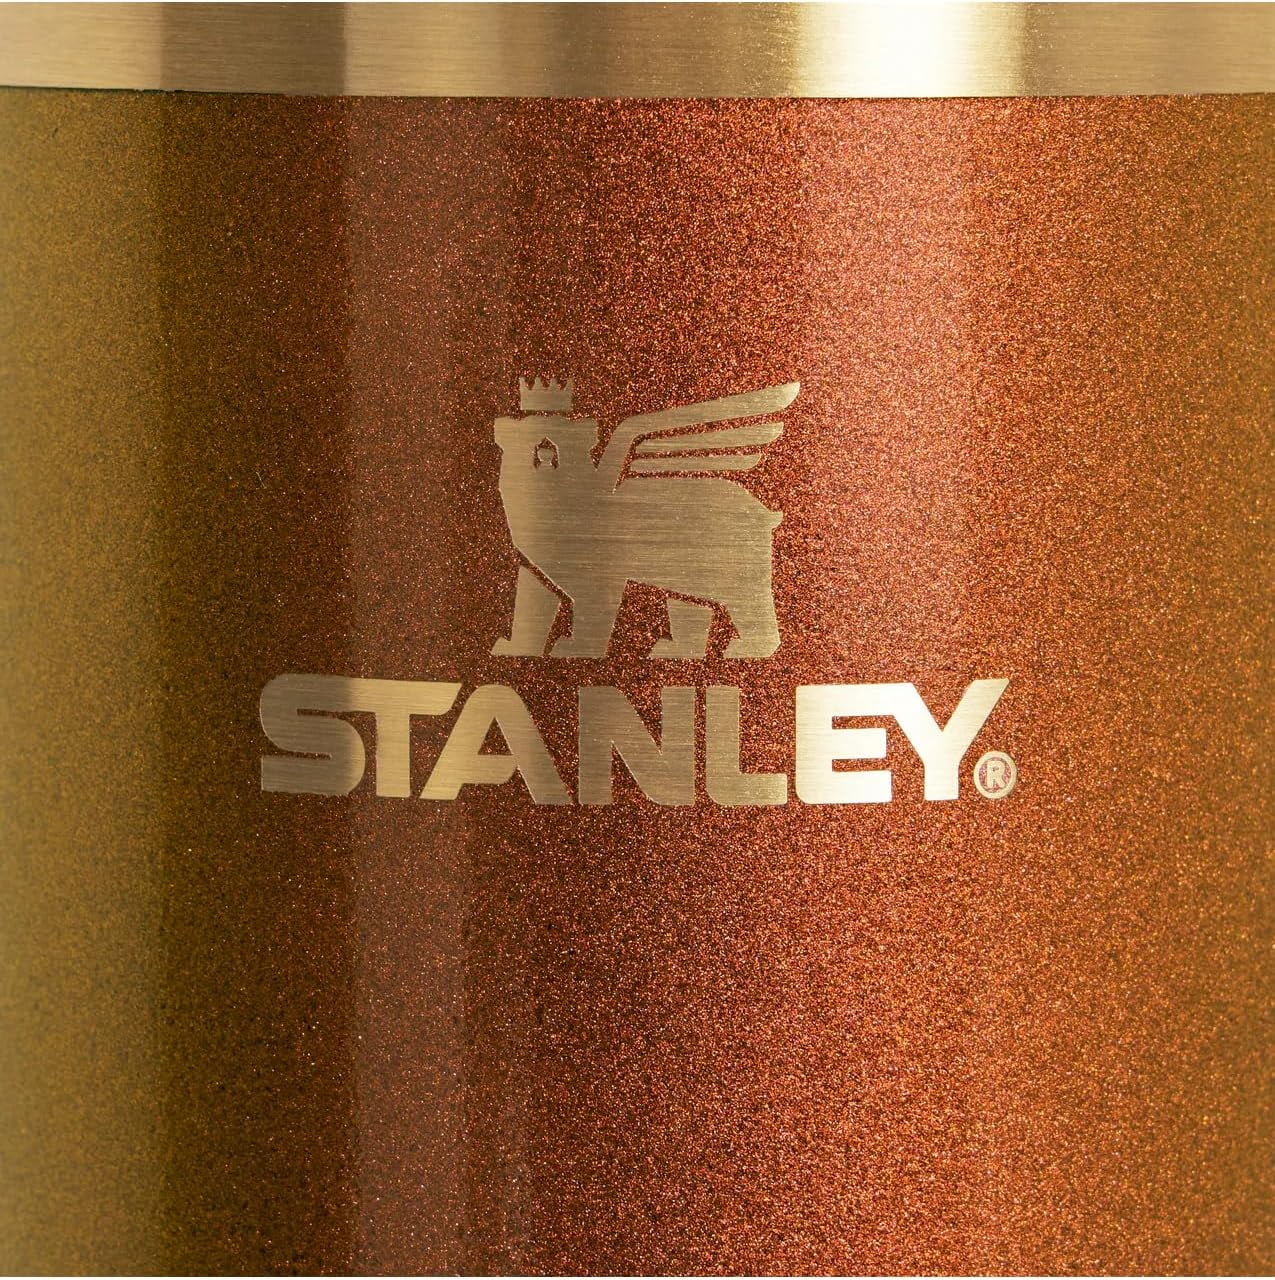 Where to Buy Lainey Wilson's New Country Gold Stanley Tumbler